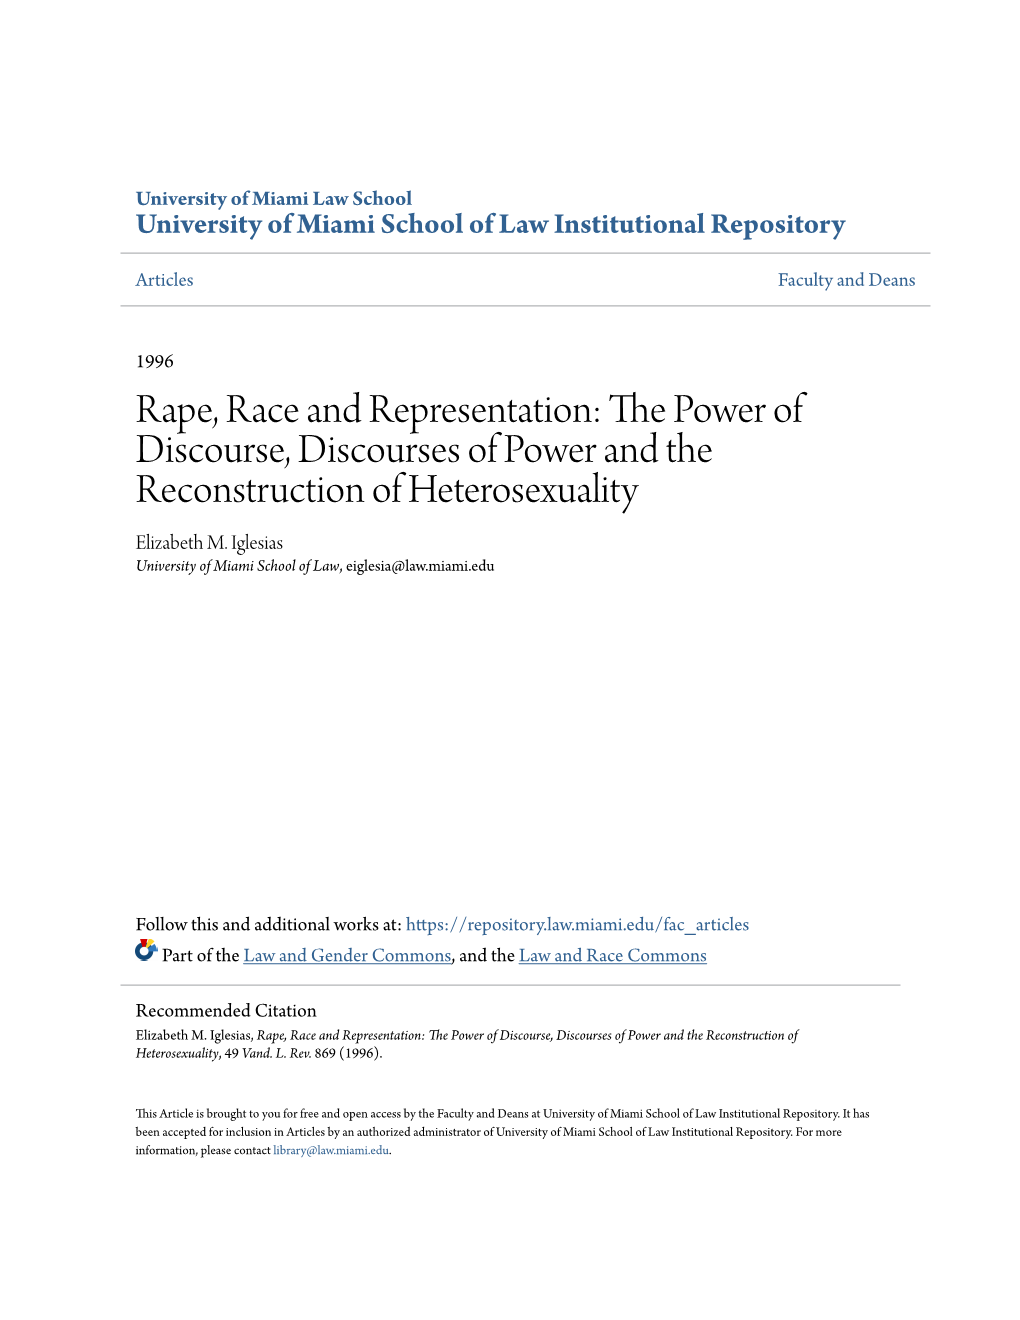 Rape, Race and Representation: the Op Wer of Discourse, Discourses of Power and the Reconstruction of Heterosexuality Elizabeth M